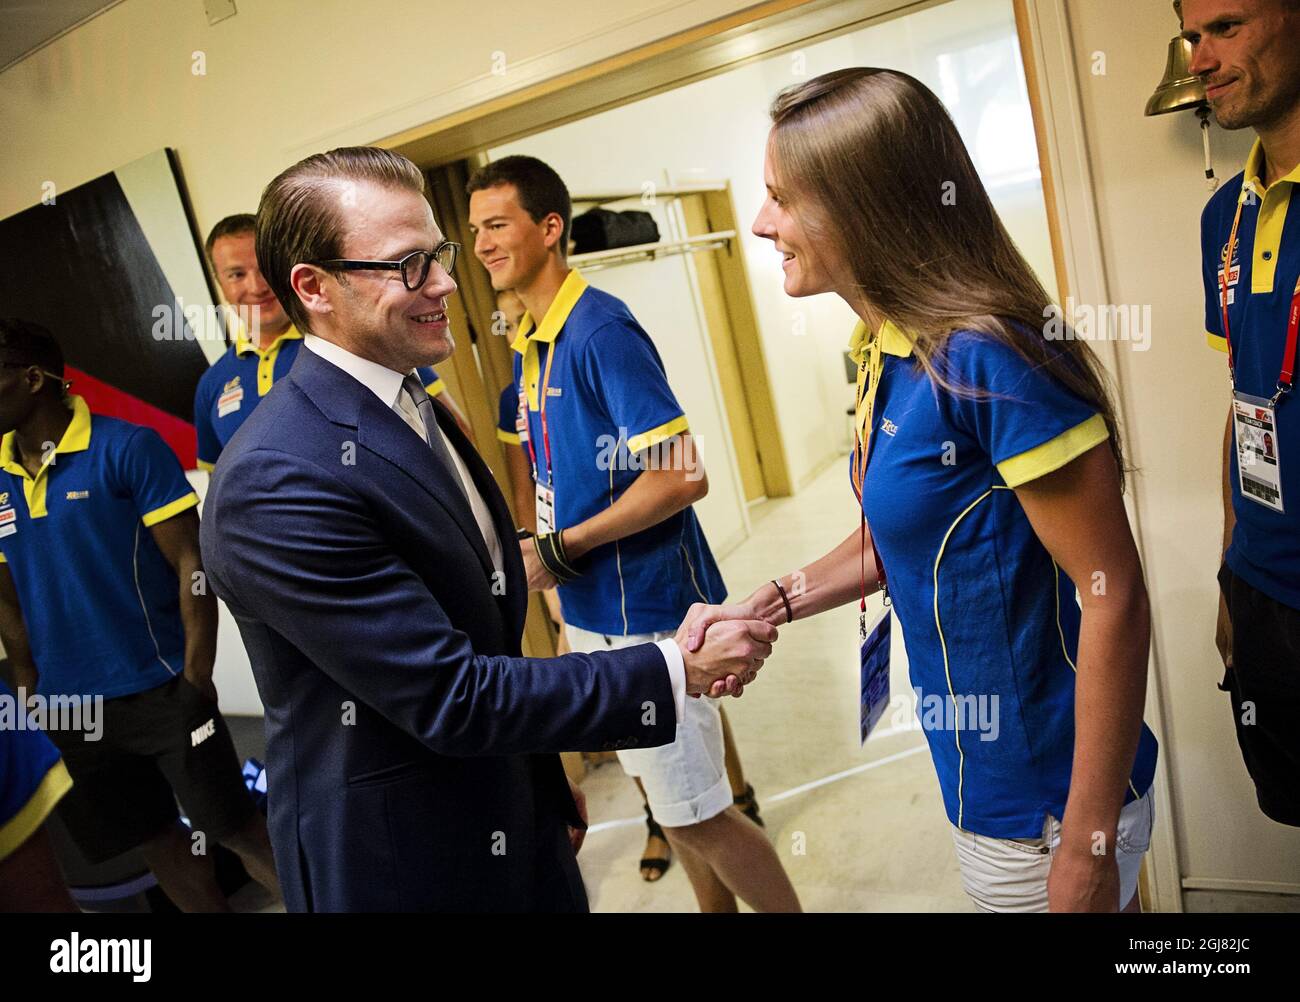 MOSKVA 2013-08-14 Prince Daniel is seen with Swedish Long Jumper Erica Jarders during a reception the Swedish Embassy in Moscow, Russia, August 14, 2013. Foto: Erik Martensson / SCANPIX / Kod 10400  Stock Photo